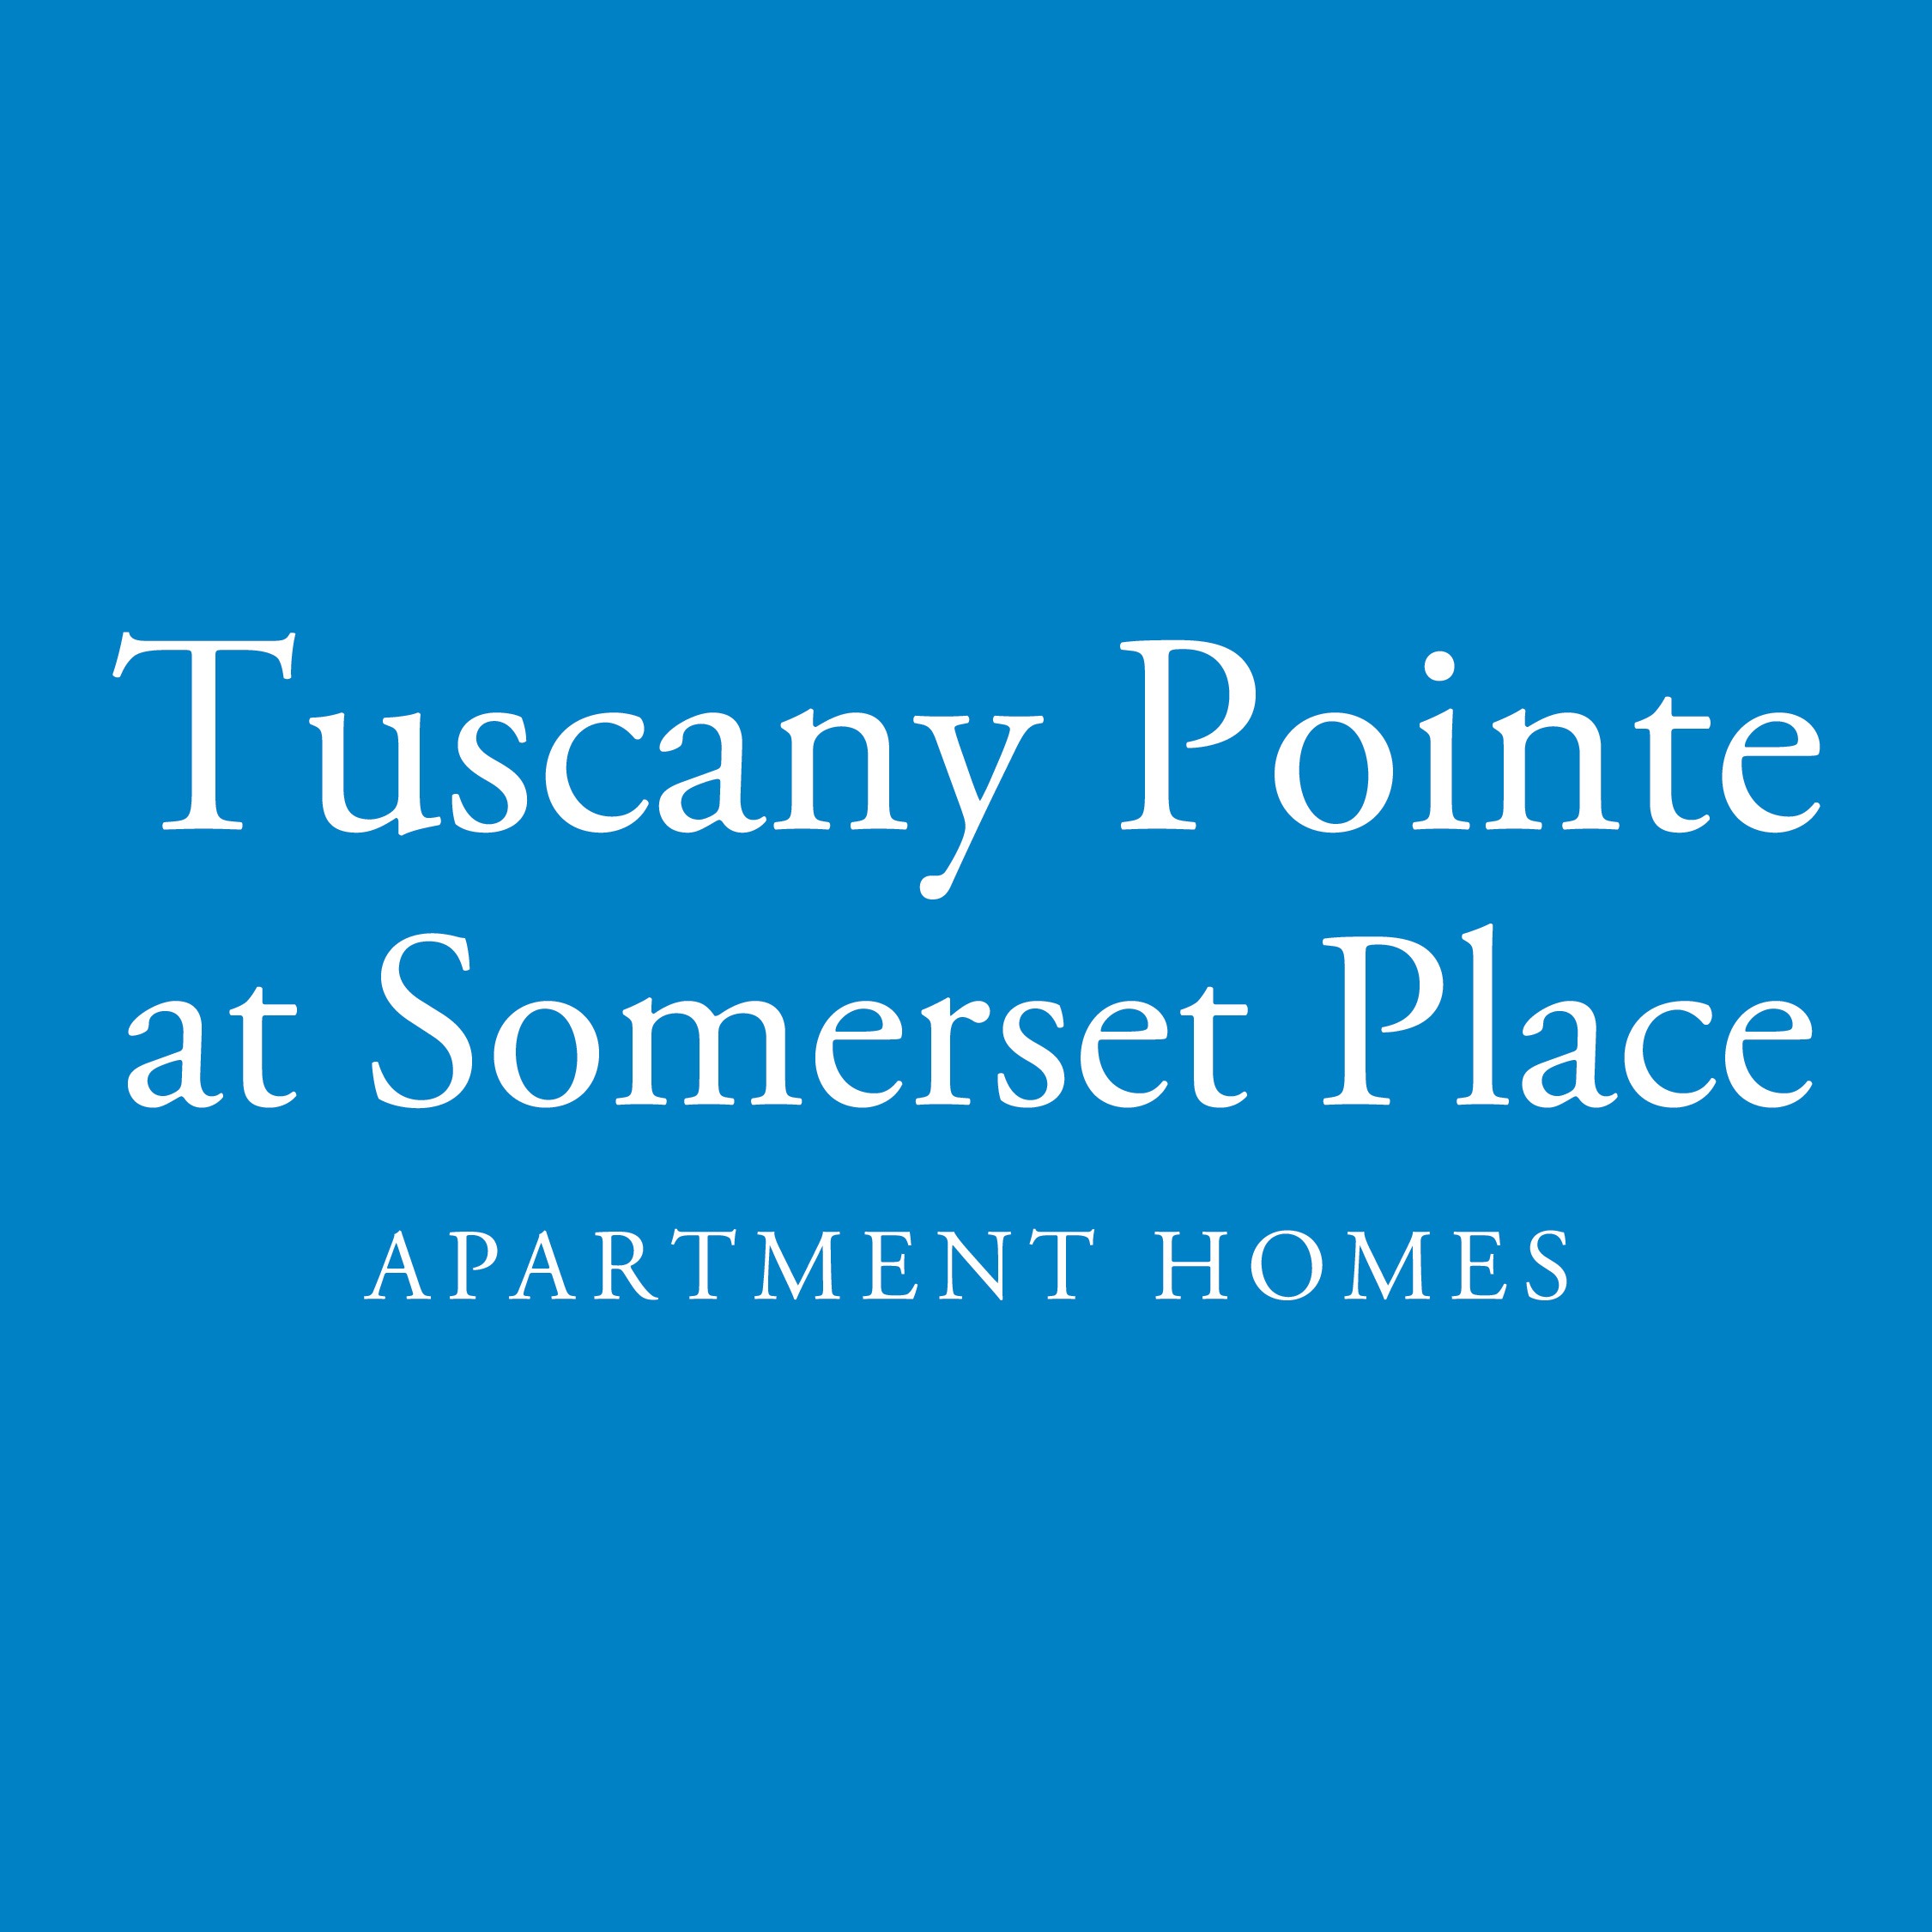 Tuscany Pointe at Somerset Place Apartment Homes